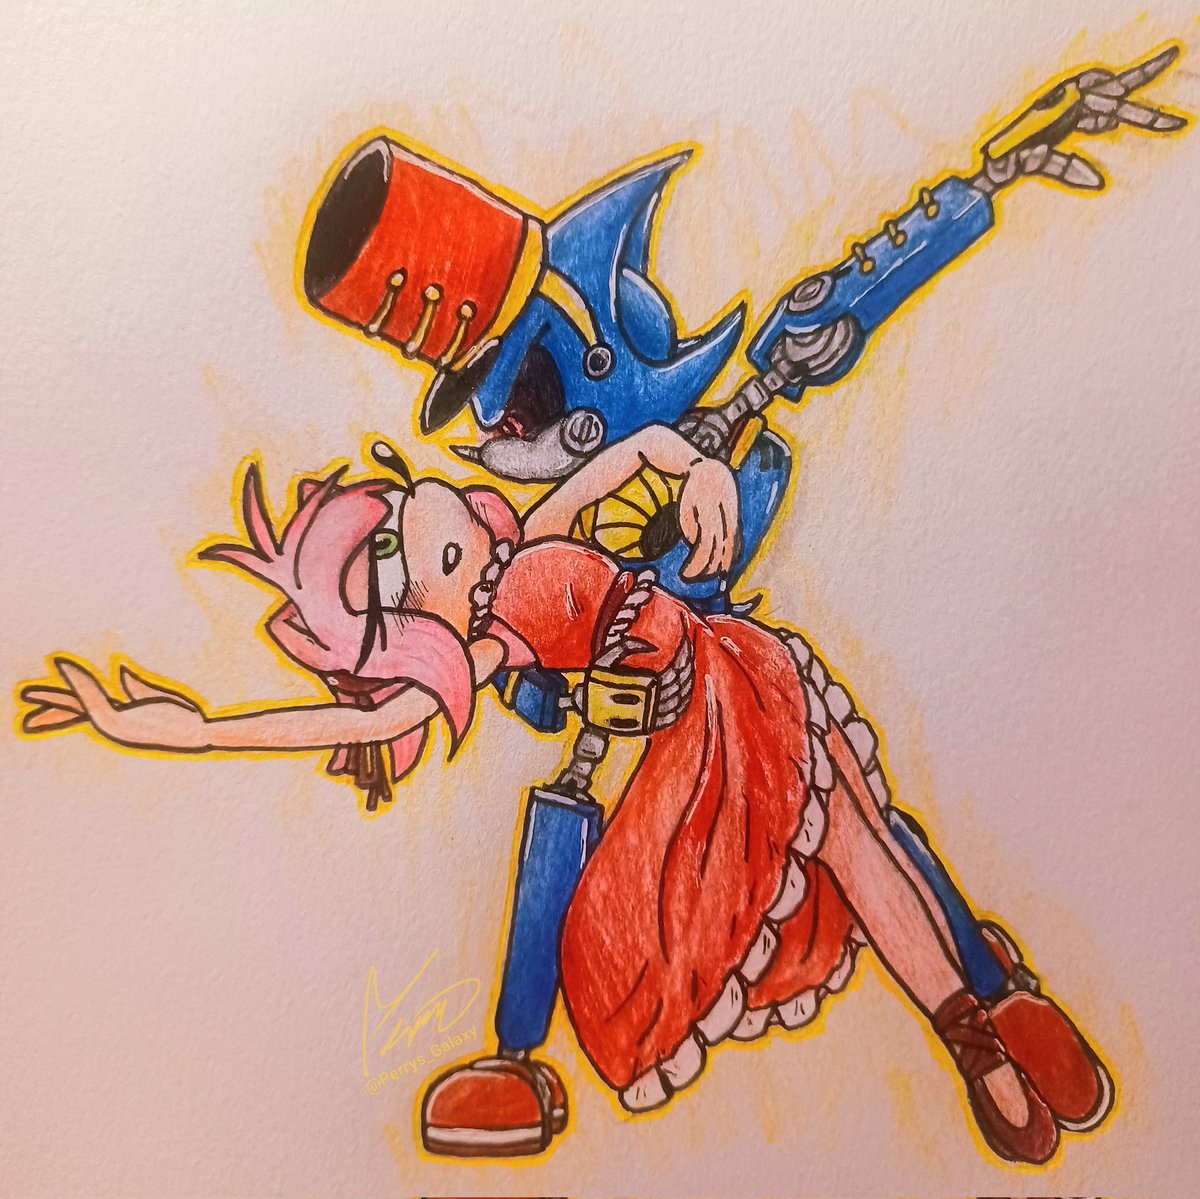 Nutcracker brainrot going crazy in the middle of summer my bad
#SonicTheHedgehog #Metamy #MetalSonic #AmyRose